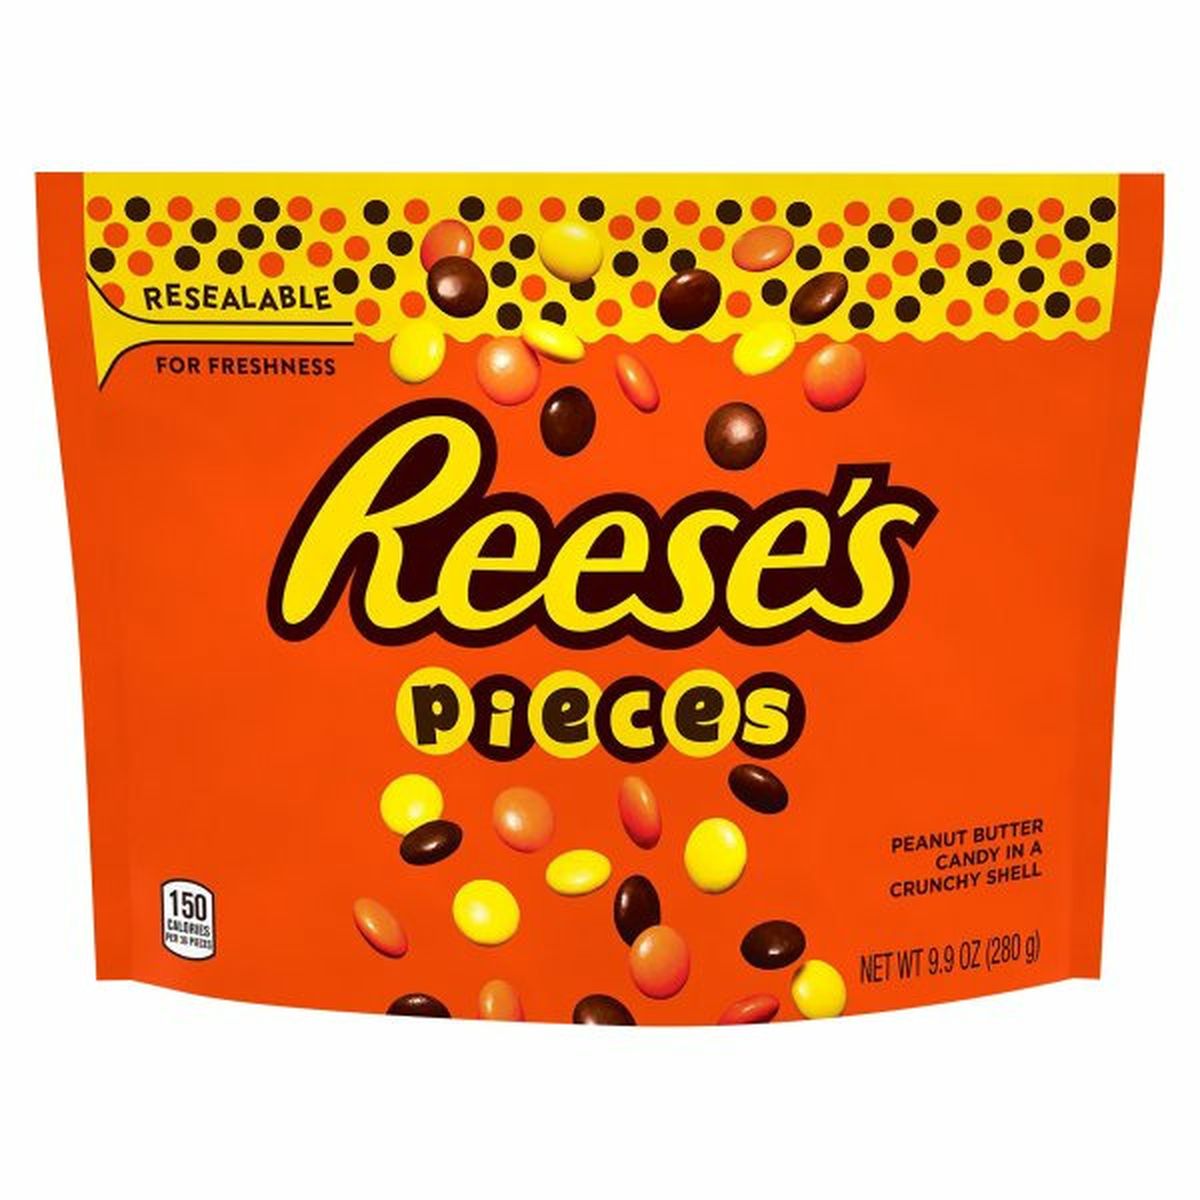 Calories in Reese's Pieces Peanut Butter Candy